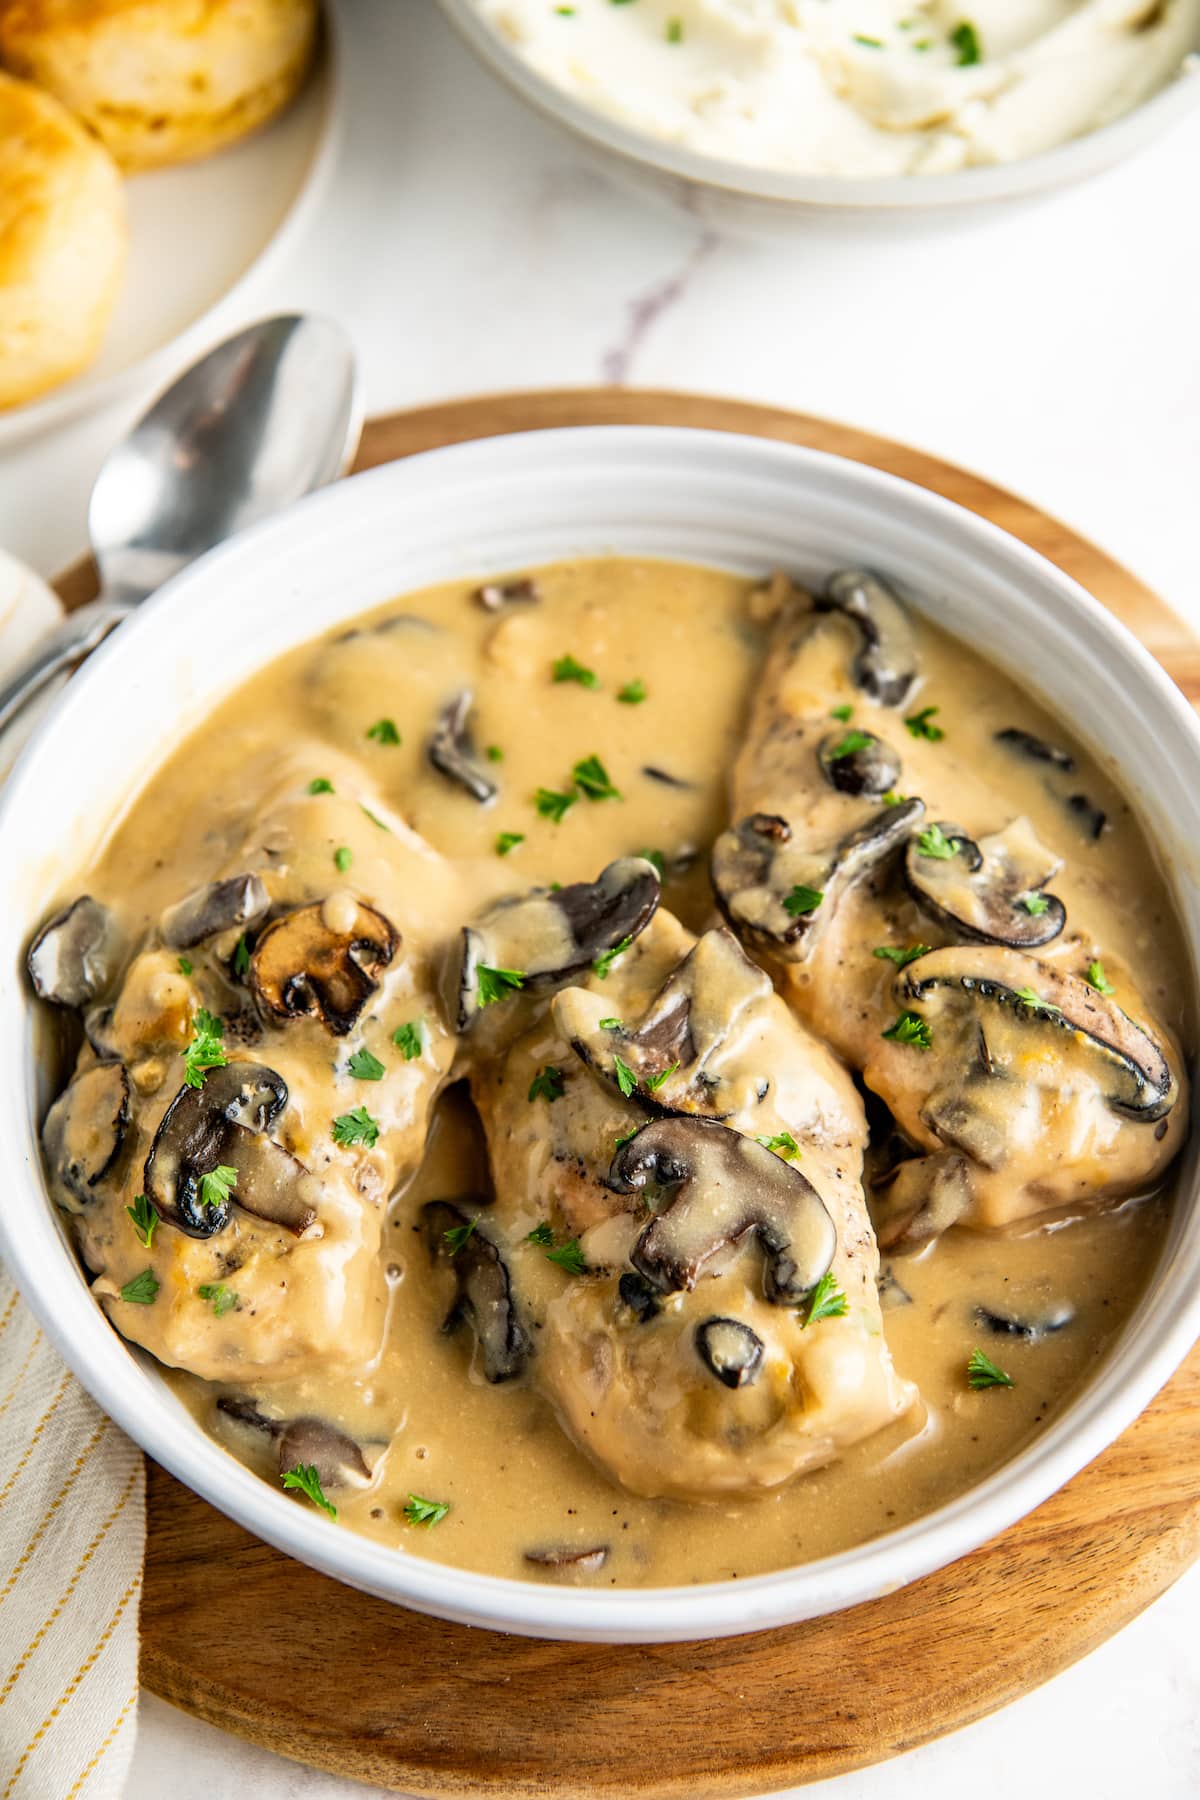 Chicken breasts in a serving dish with gravy, mushrooms, and parsley